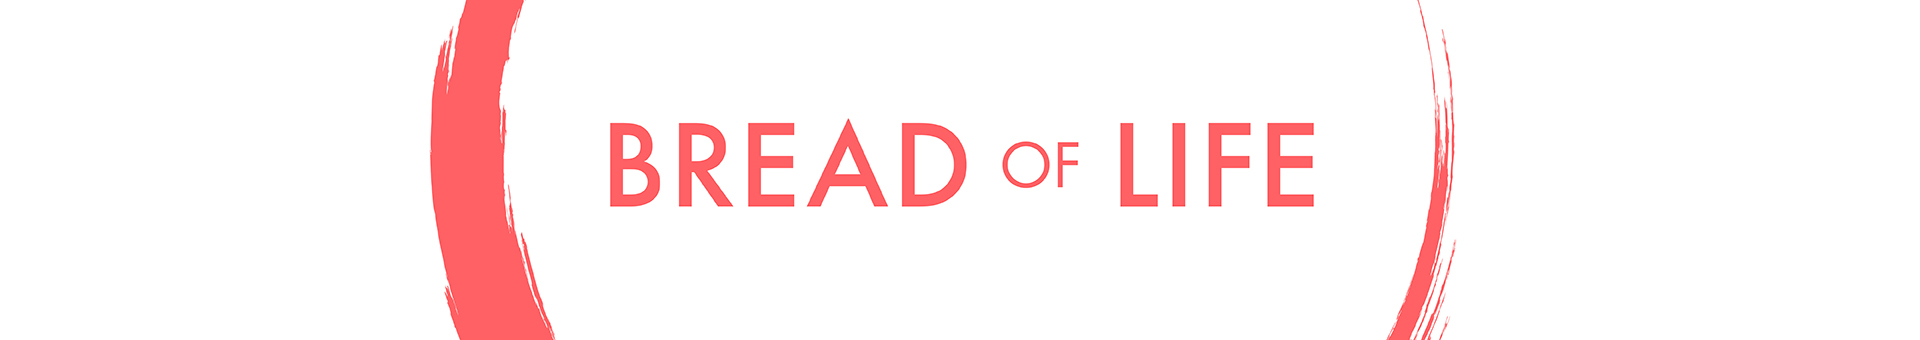 Bread of Life Course Banner